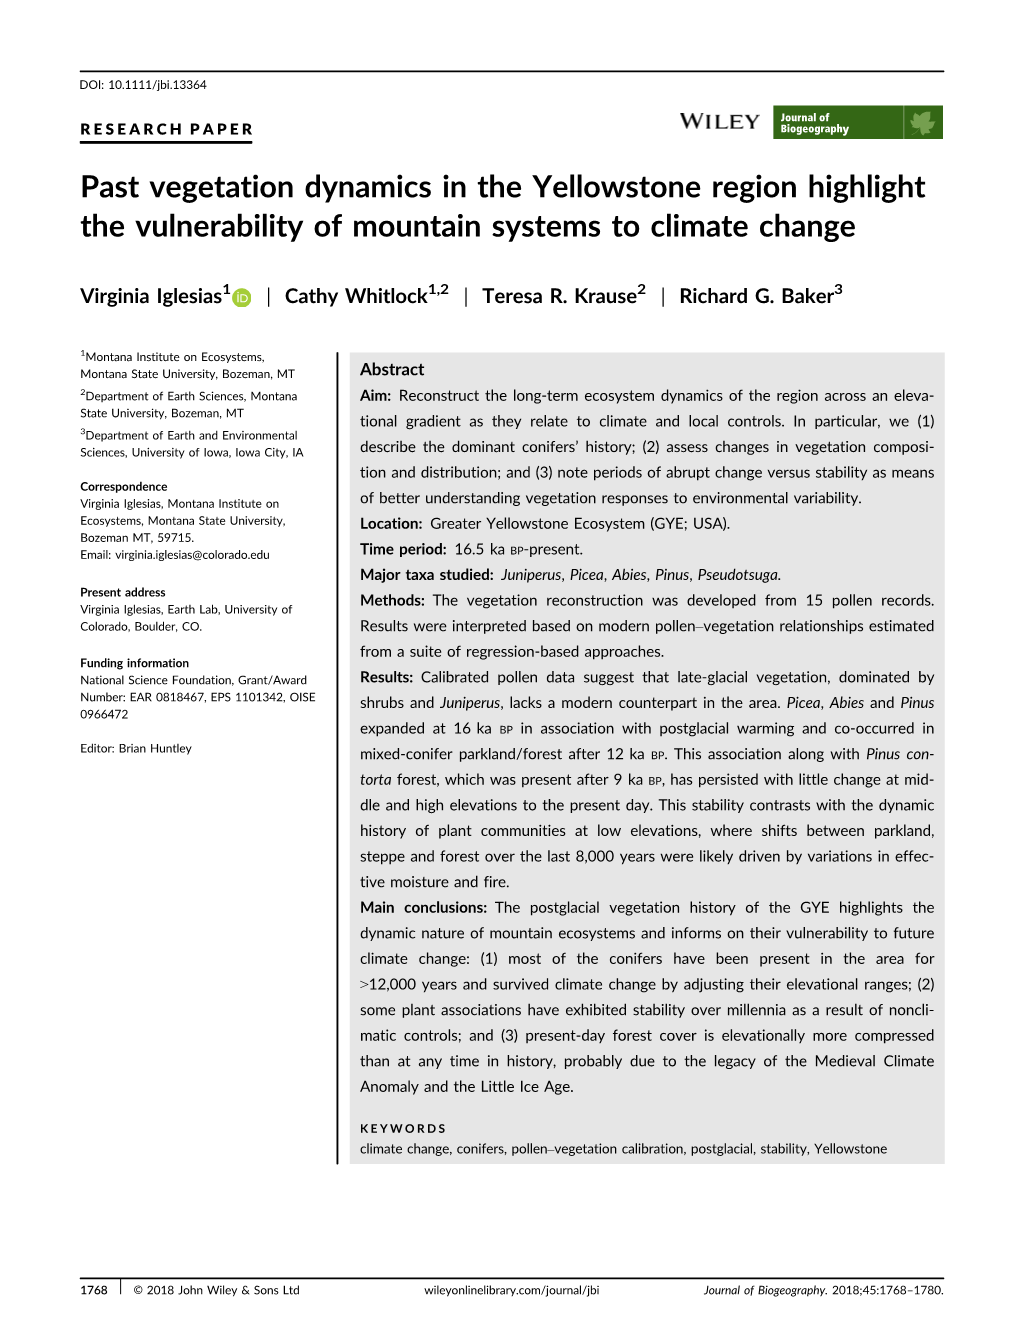 Past Vegetation Dynamics in the Yellowstone Region Highlight the Vulnerability of Mountain Systems to Climate Change